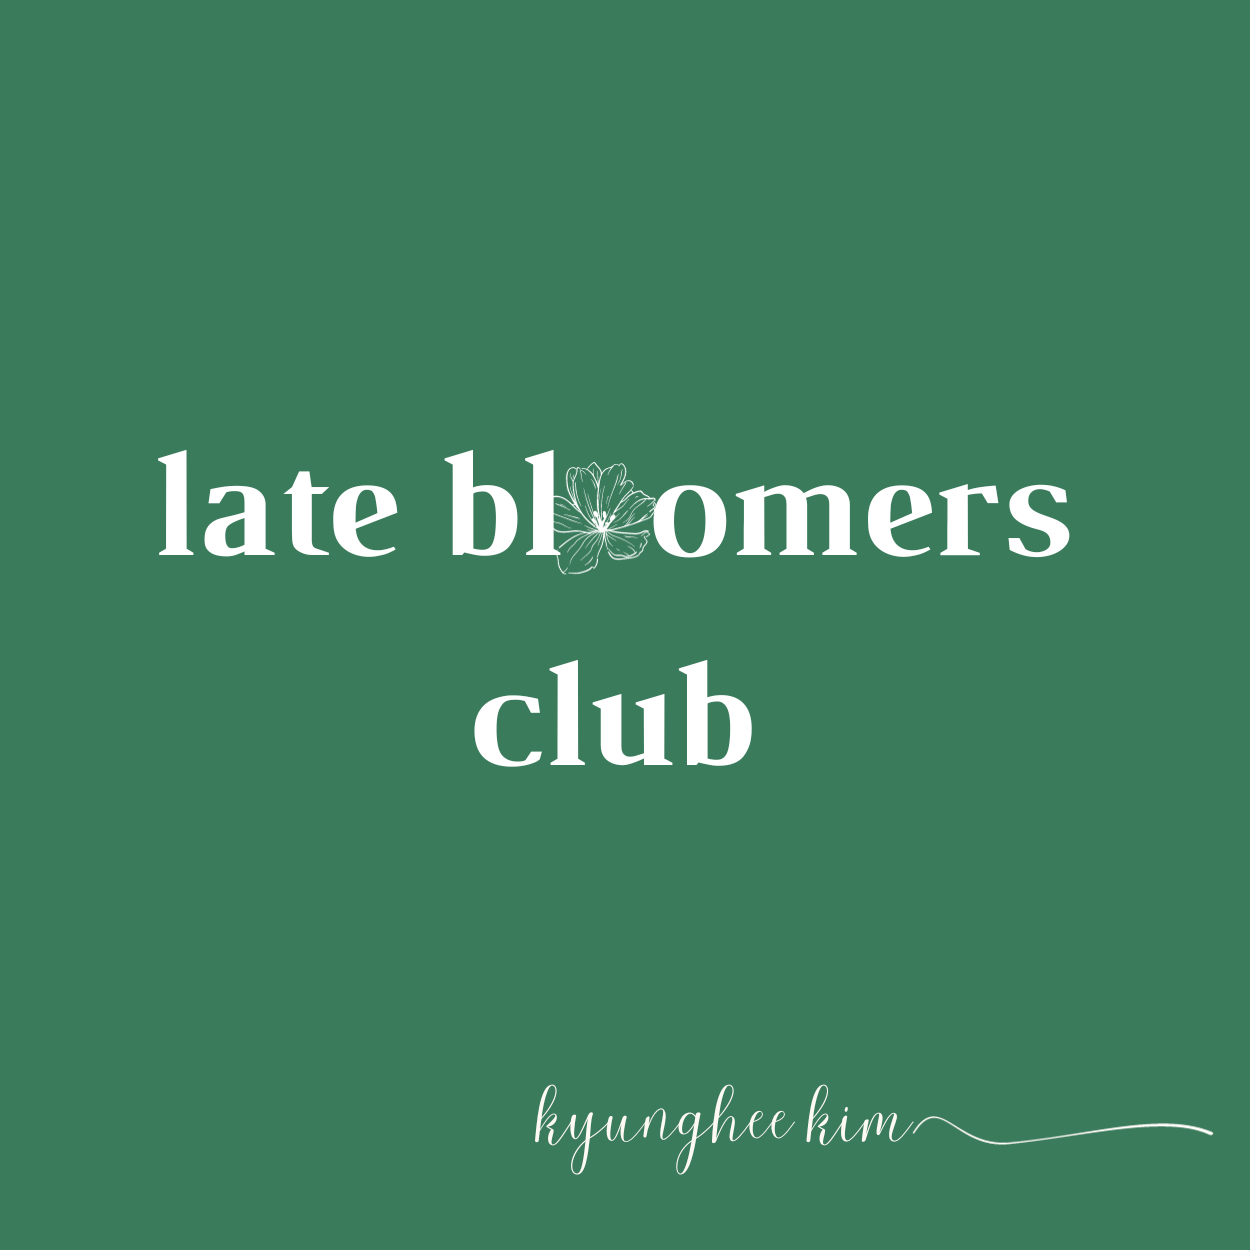 Artwork for late bloomers club